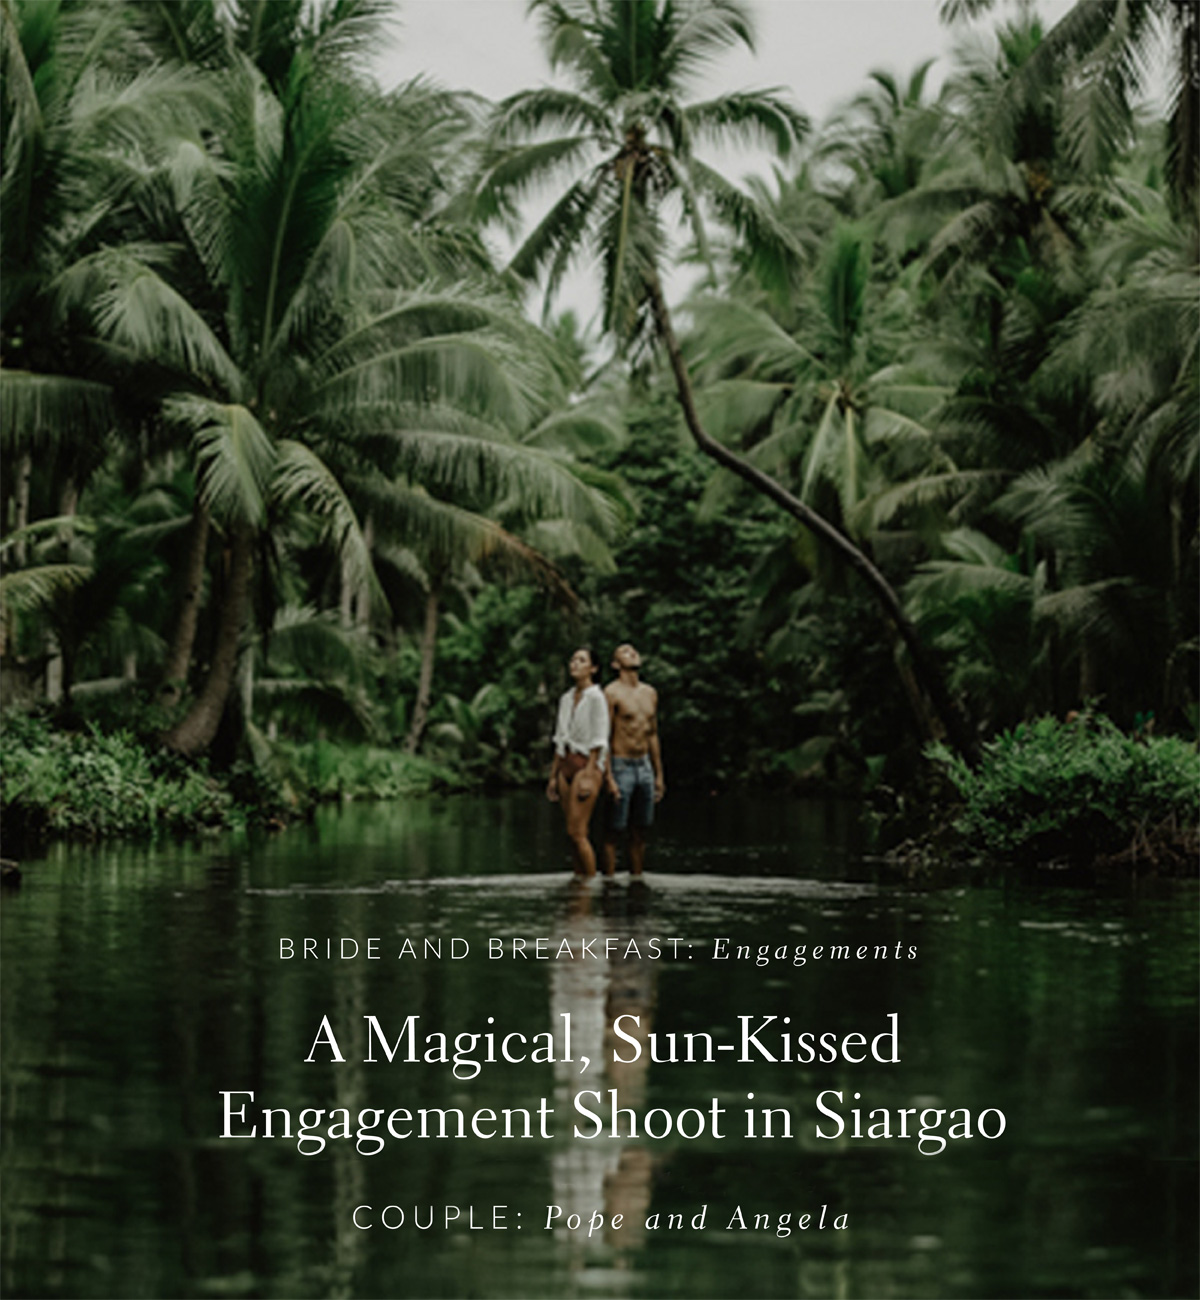 A Magical, Sun-Kissed Engagement Shoot in Siargao